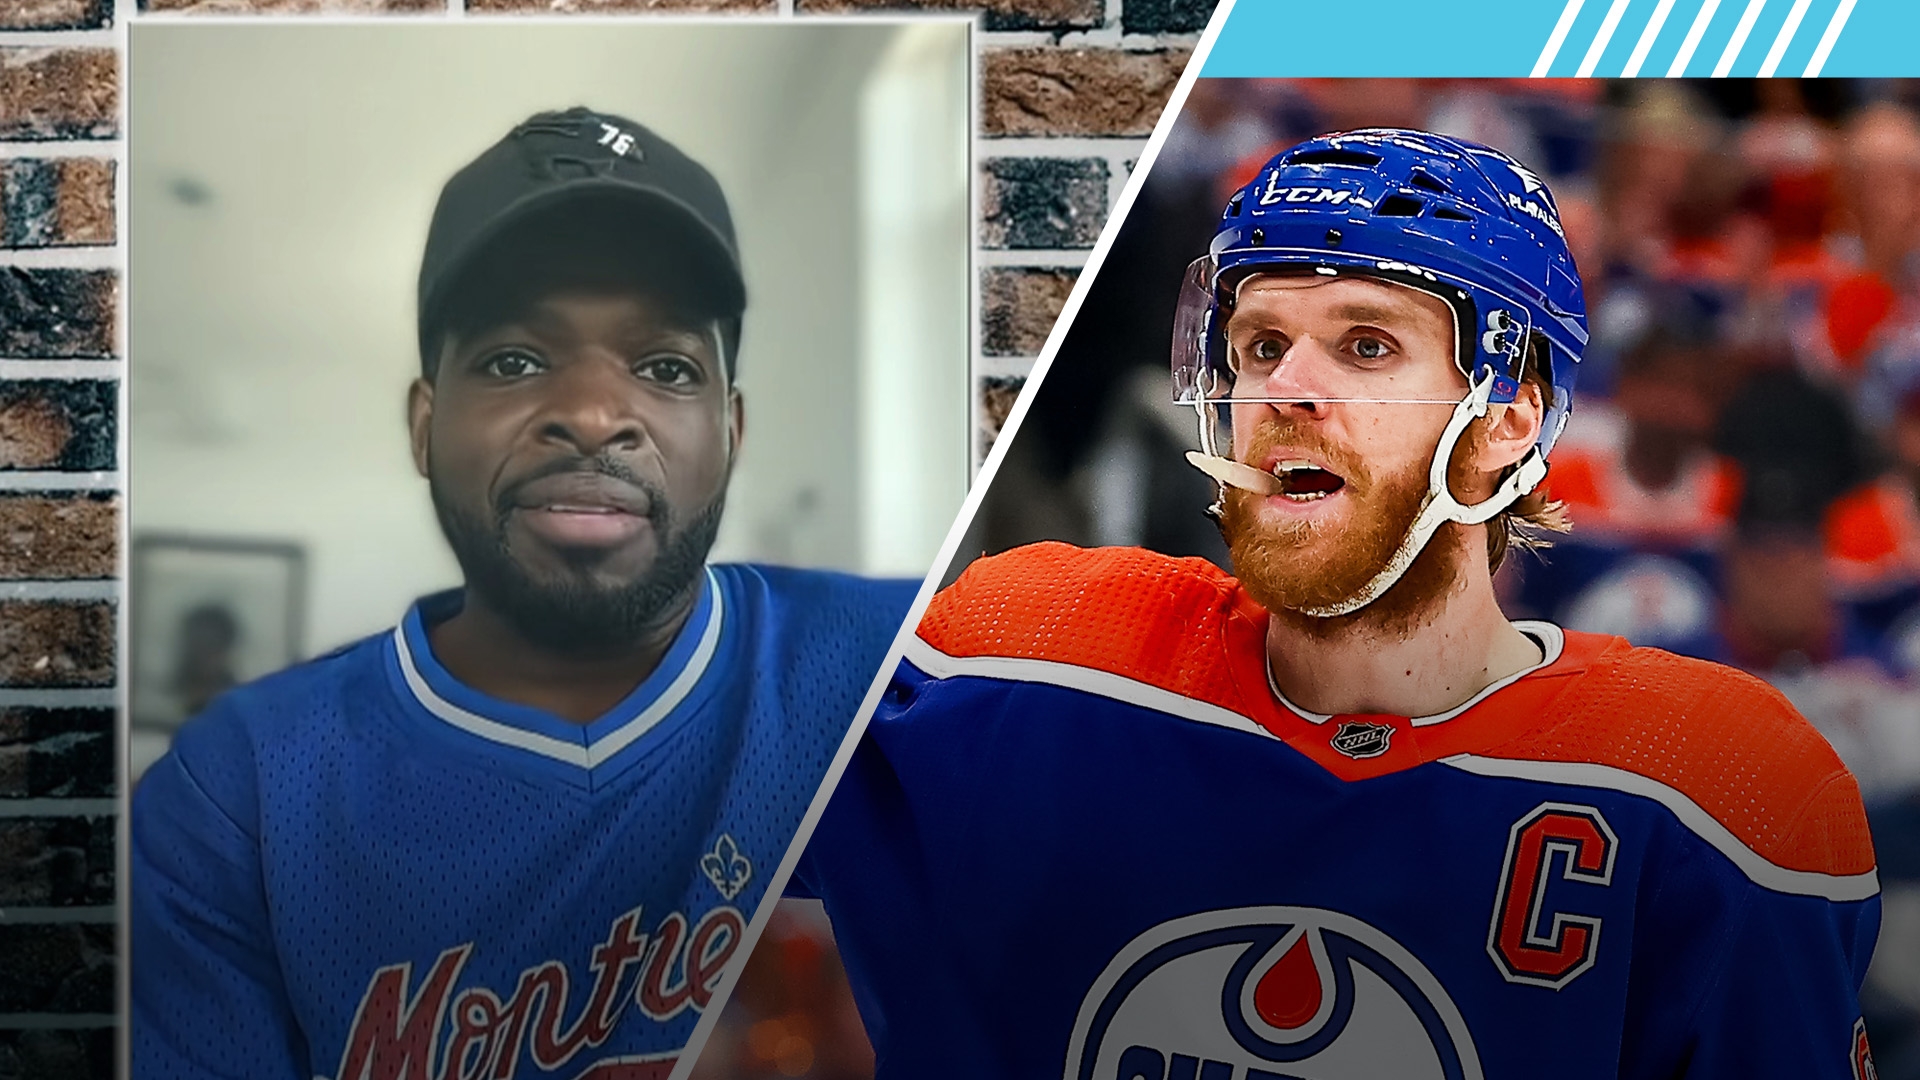 P.K. Subban to McAfee: No doubt 'Connor McDavid is the best player in the world'